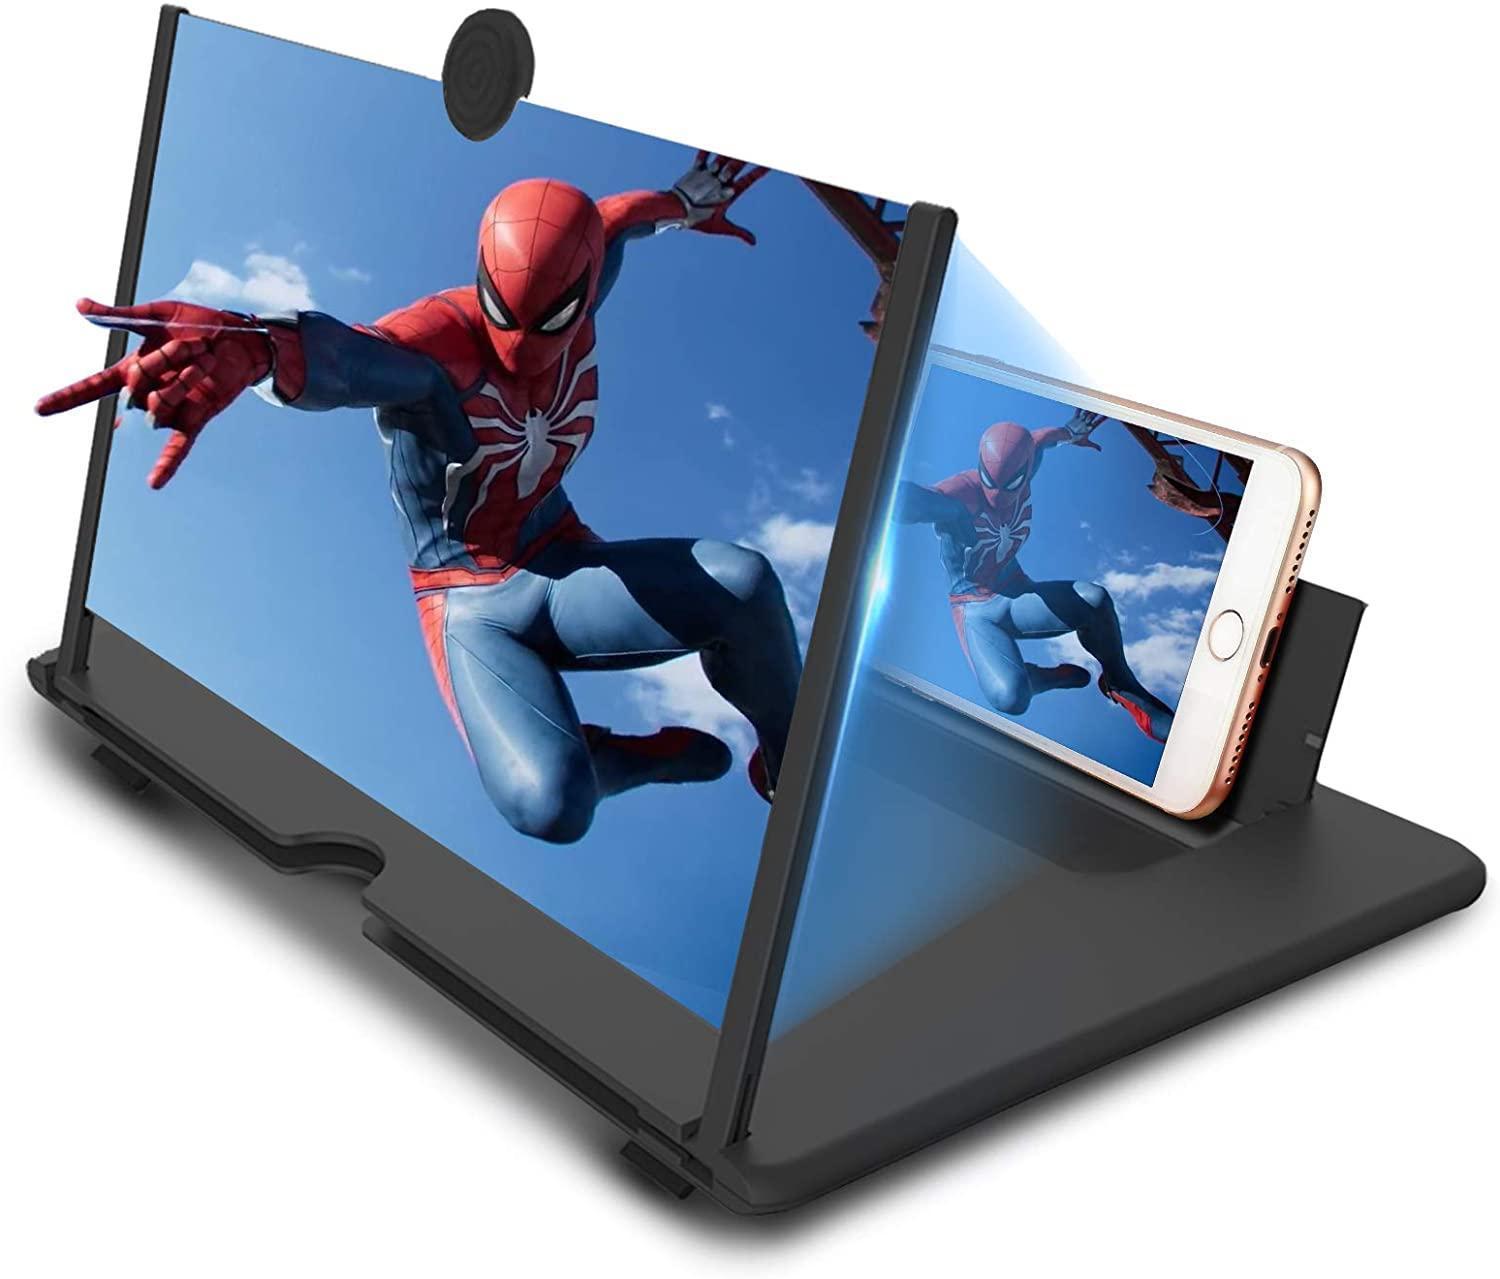 12 Inch Screen Magnifier with Foldable Stand Holder for All Smartphones, $32.99 MSRP (BRAND NEW)